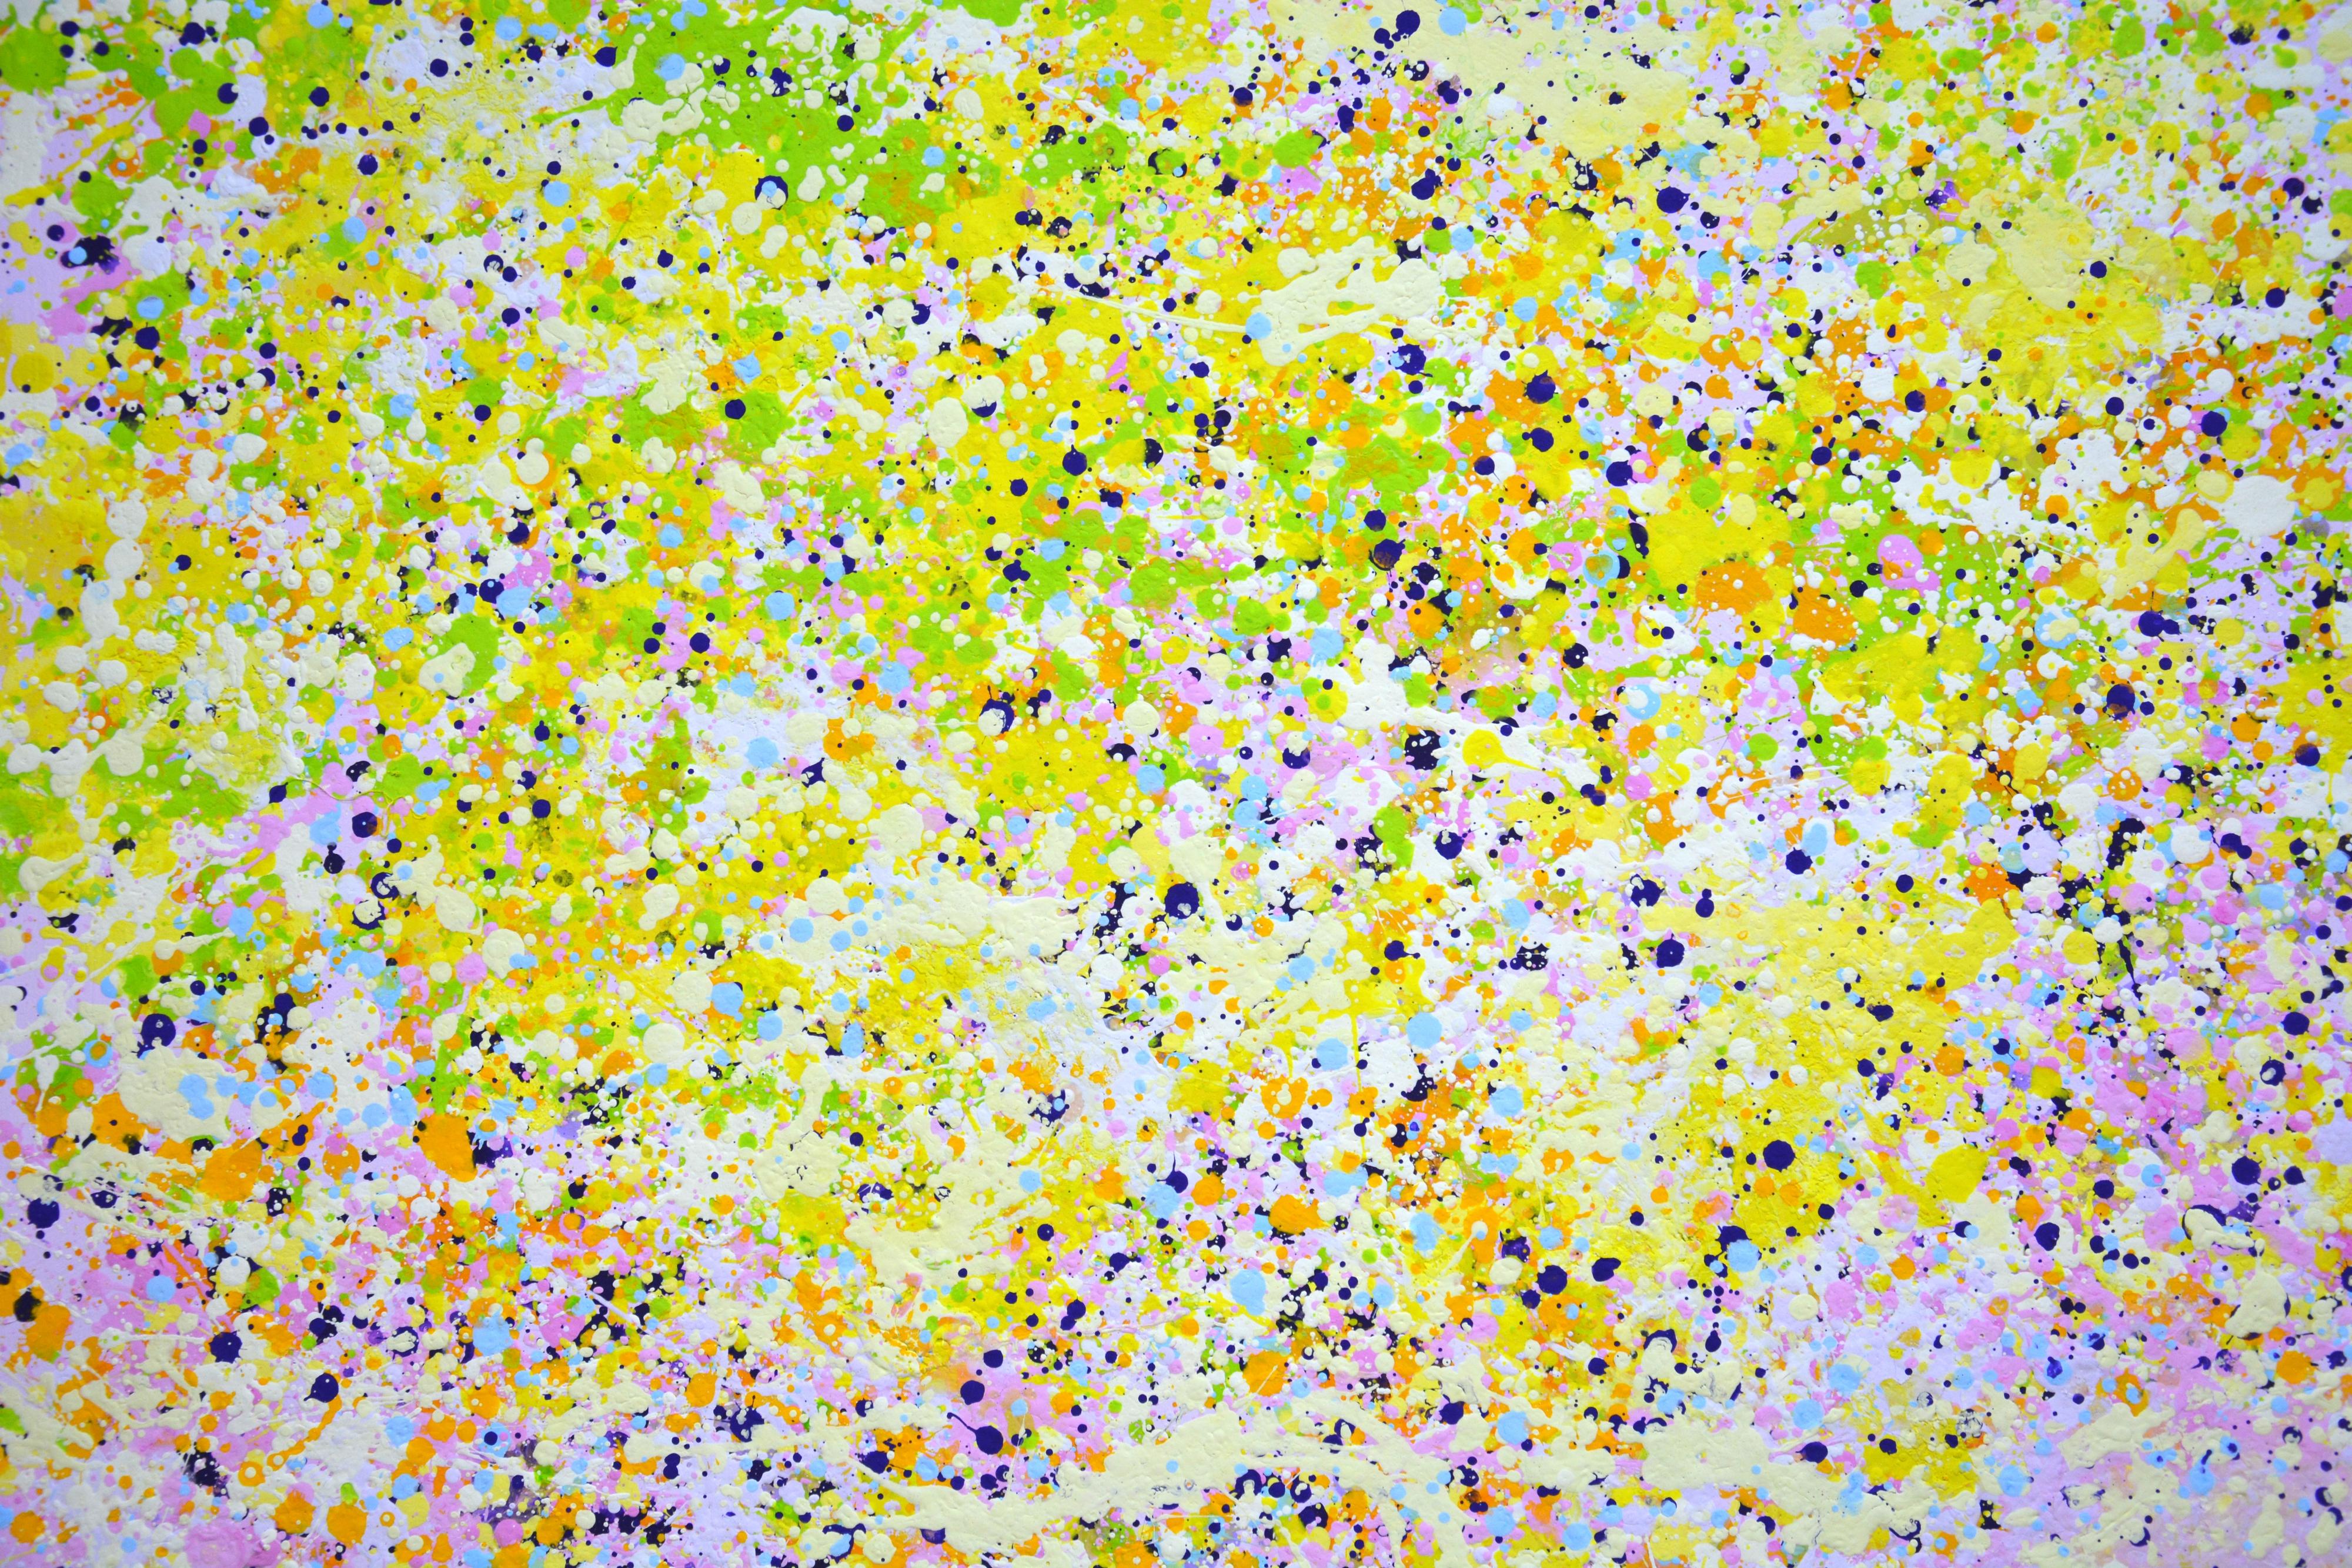 Sunny summer 5. This is an original, expressive, modern abstract acrylic painting created using dripping and splashing paint onto canvas. The product has a modern aesthetic design and is filled with positive energy. Warm colors overlap and stand out